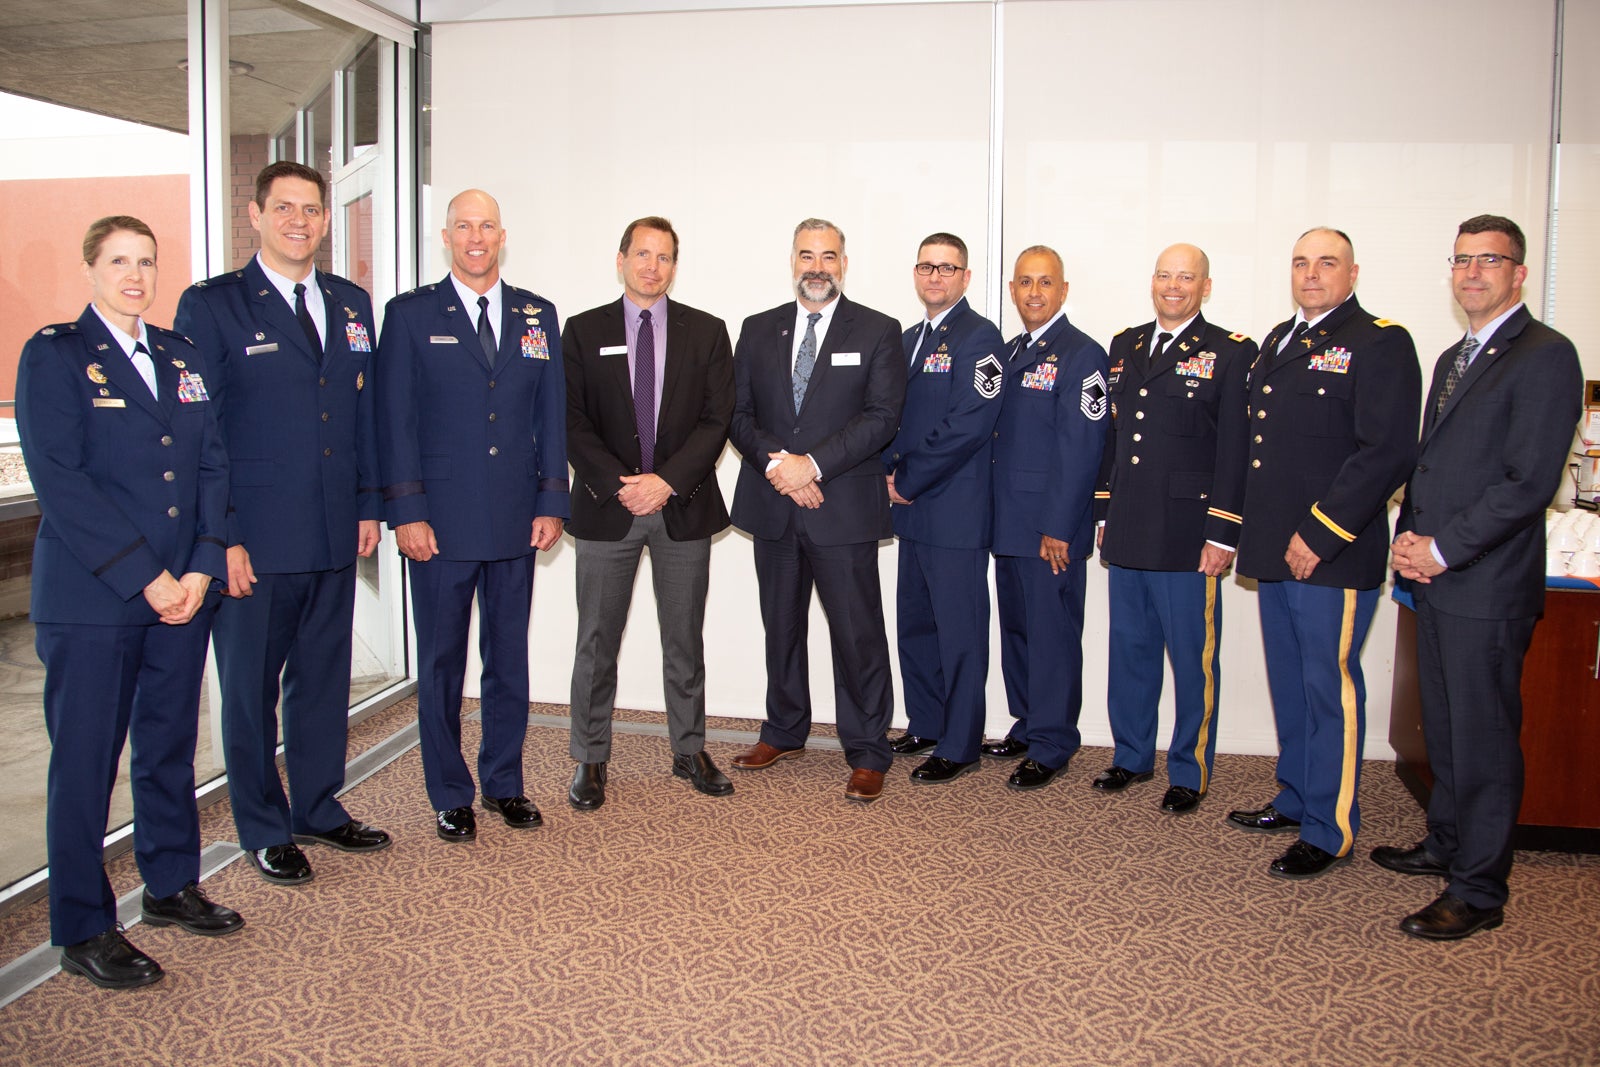 Military leaders and Boise State University leadership